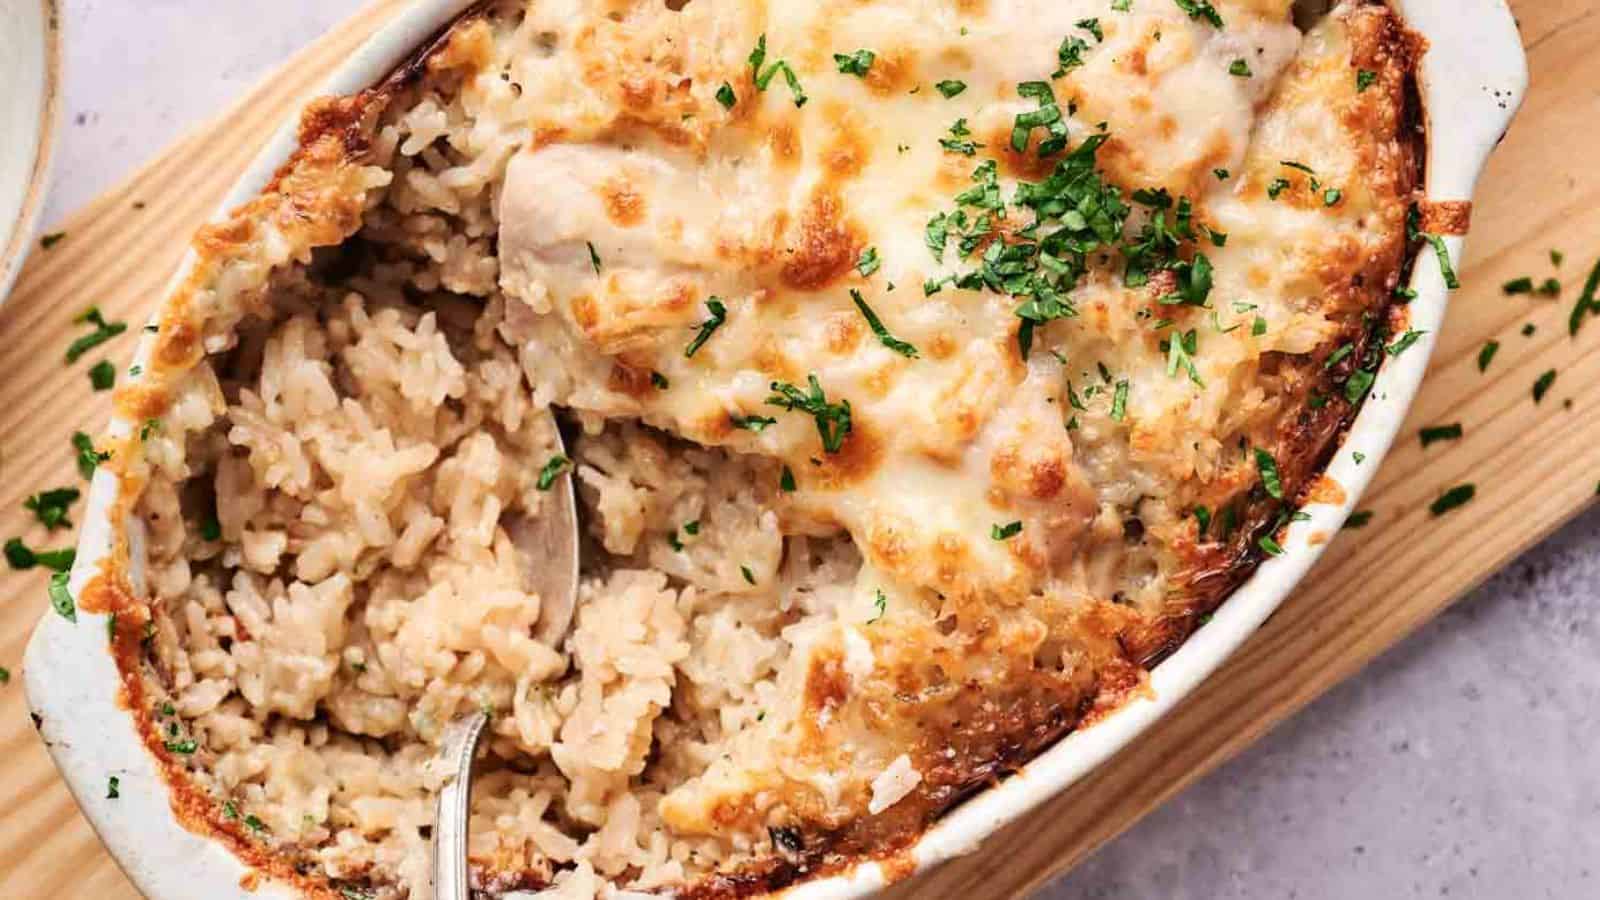 A baked rice casserole topped with melted cheese and garnished with chopped herbs.